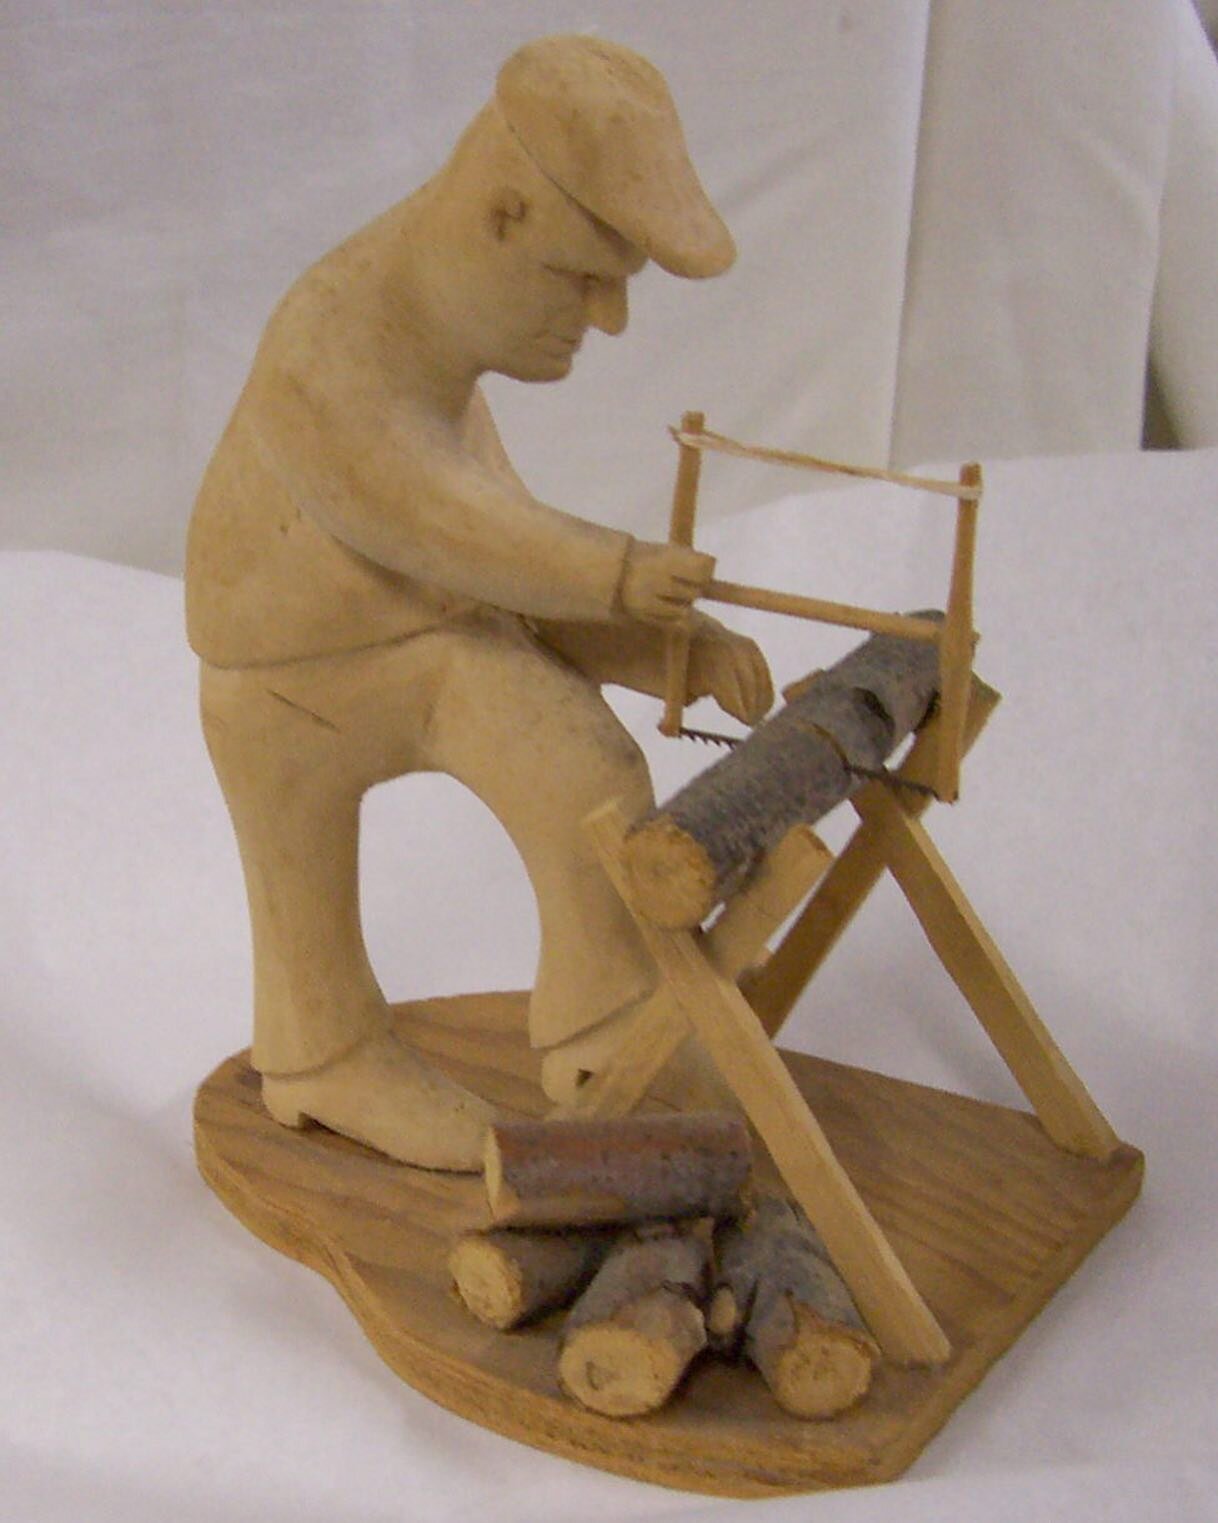 Collection mystery of the day. This amazing carved figure of a man sawing a log is in the ACHS collection. What we know: Melvin A. Nelson lived at 1000 Monroe St in Anoka and carved it. What we don't know: anything else! Who was Melvin? Do more of hi